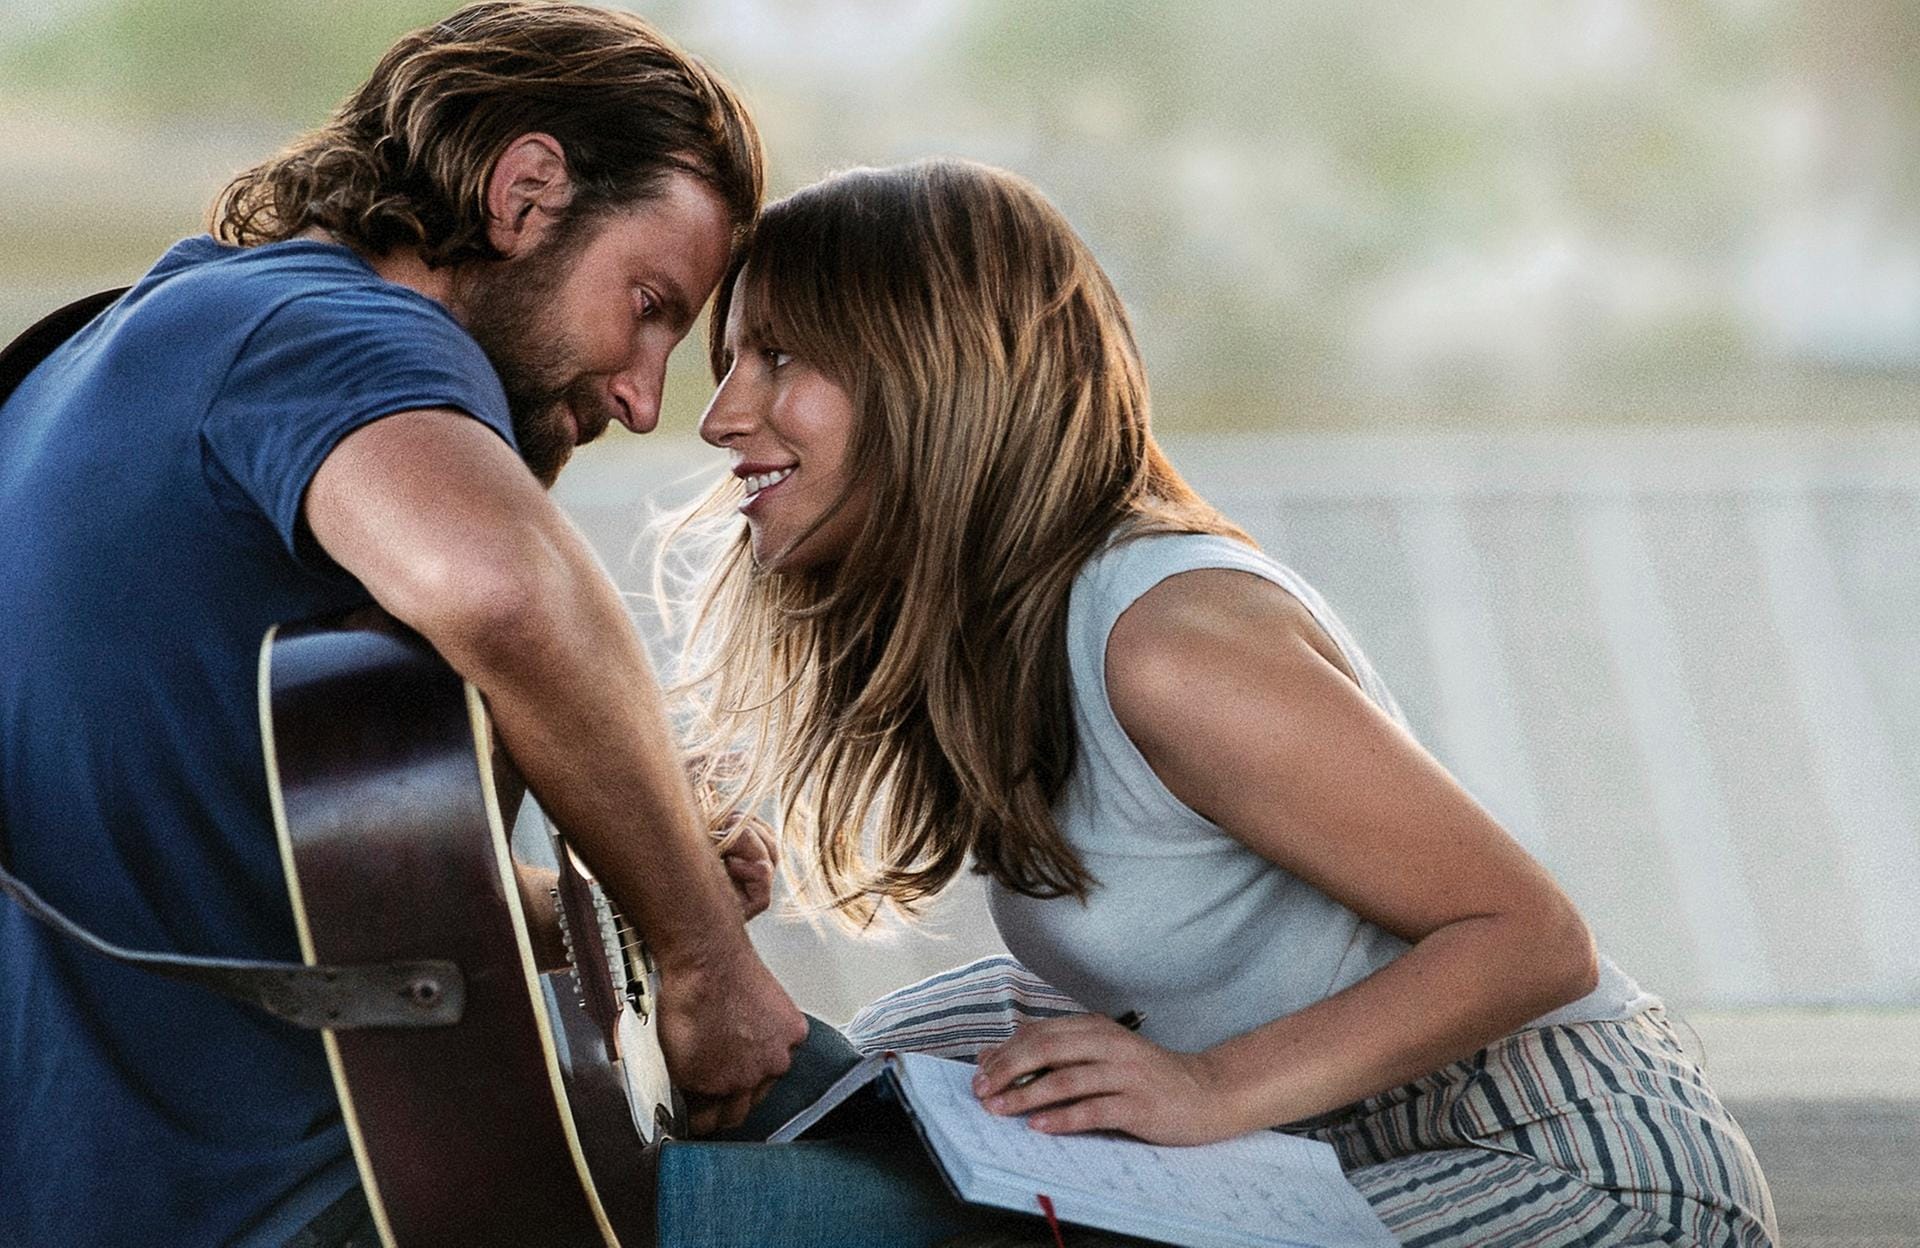 Bester Film: "A Star is Born"